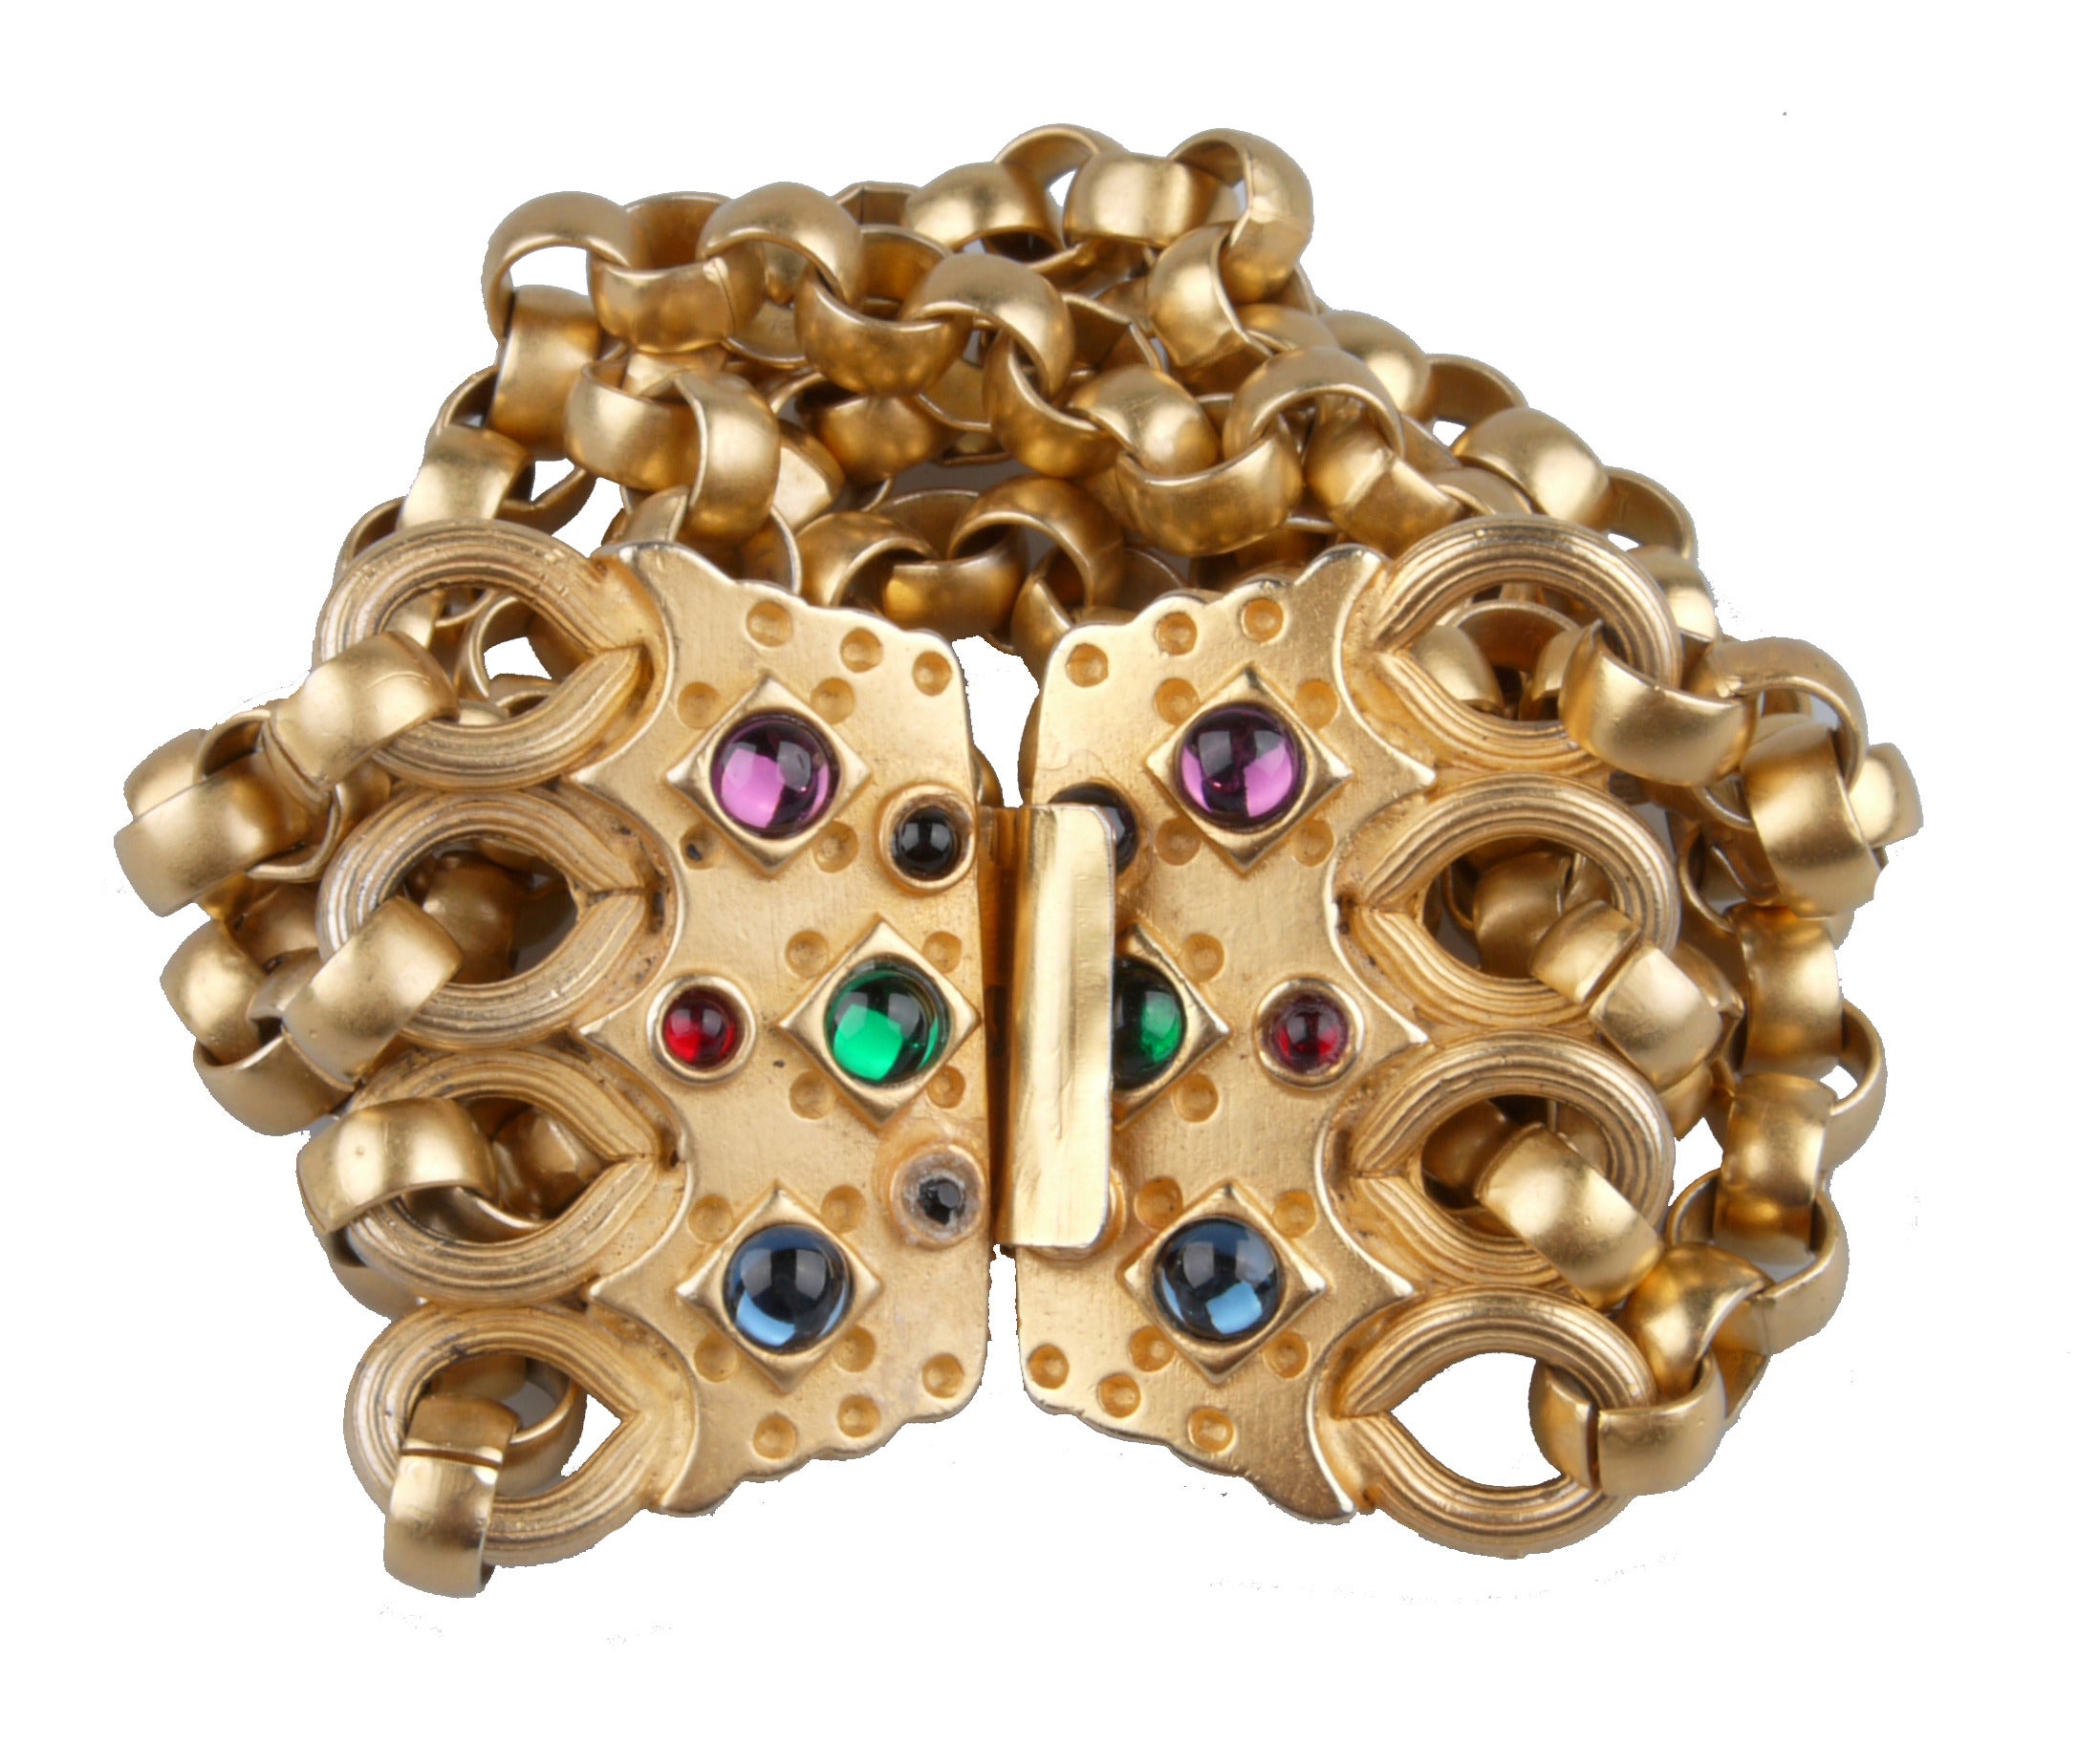 Gold-Tone Bracelet with Multicolored Stones For Sale